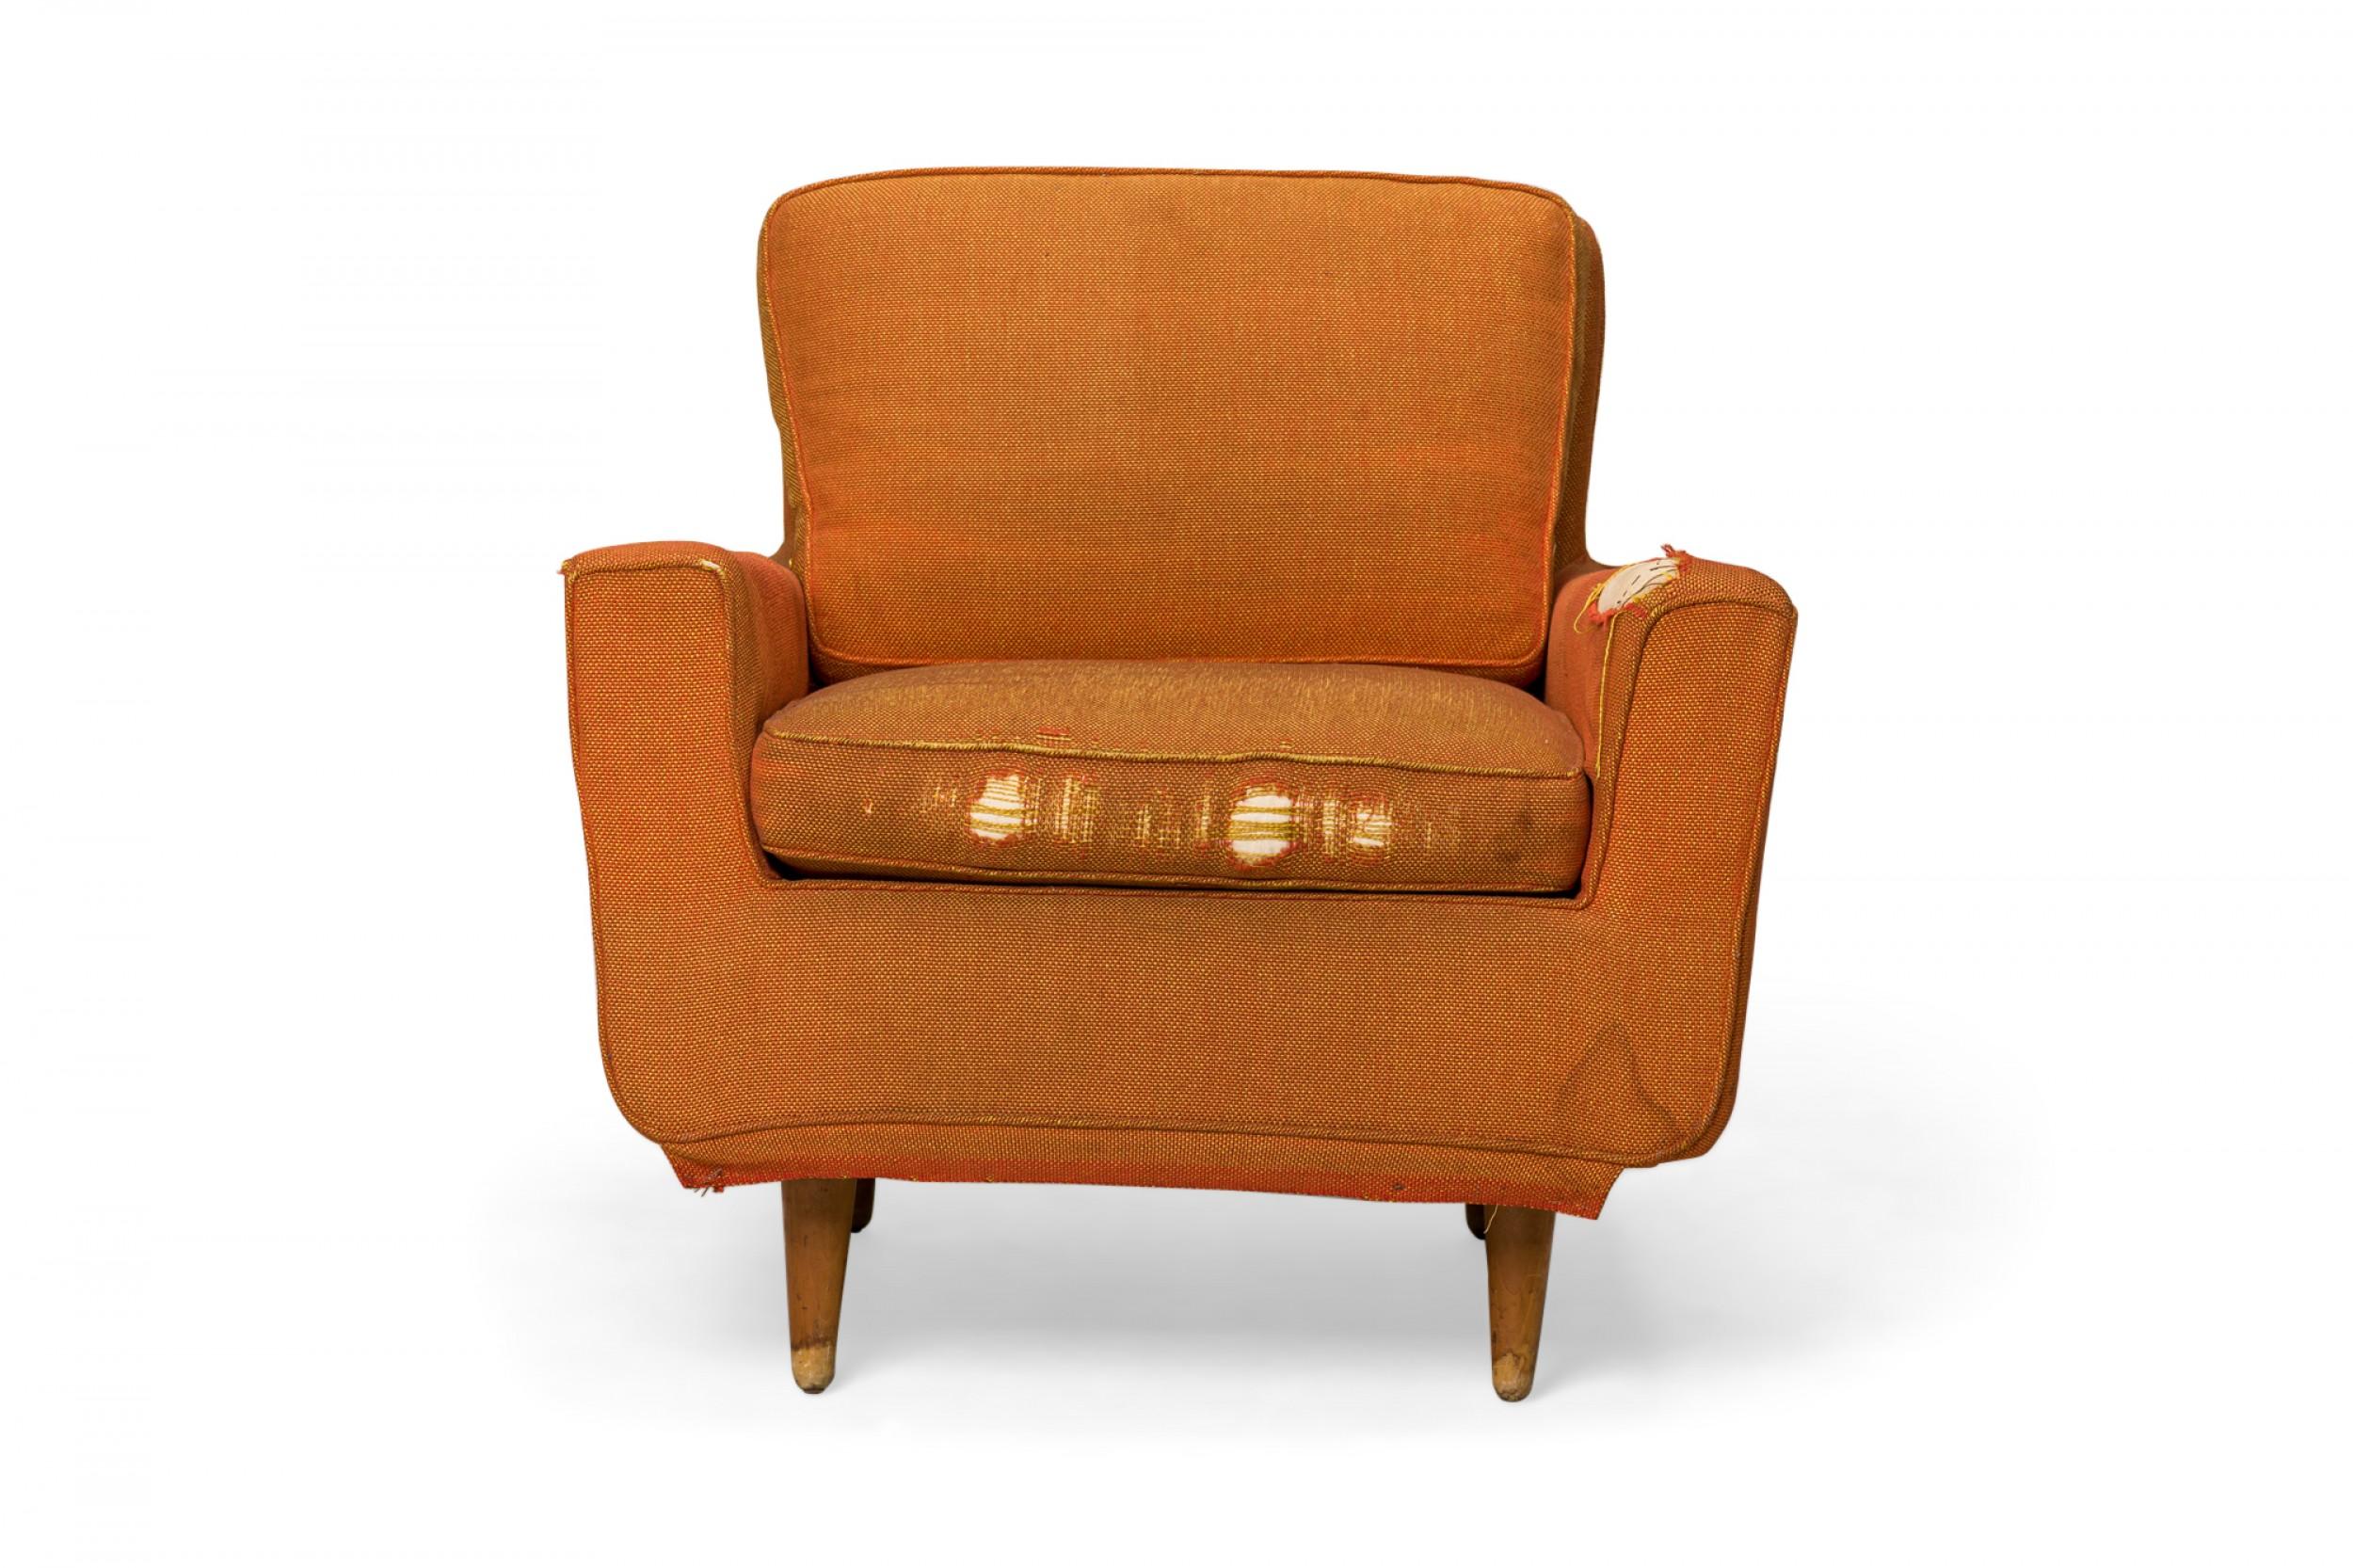 American mid-century lounge armchair with textured orange fabric upholstery, resting on four broad tapered wooden legs. (FLORENCE KNOLL FOR KNOLL INTERNATIONAL)